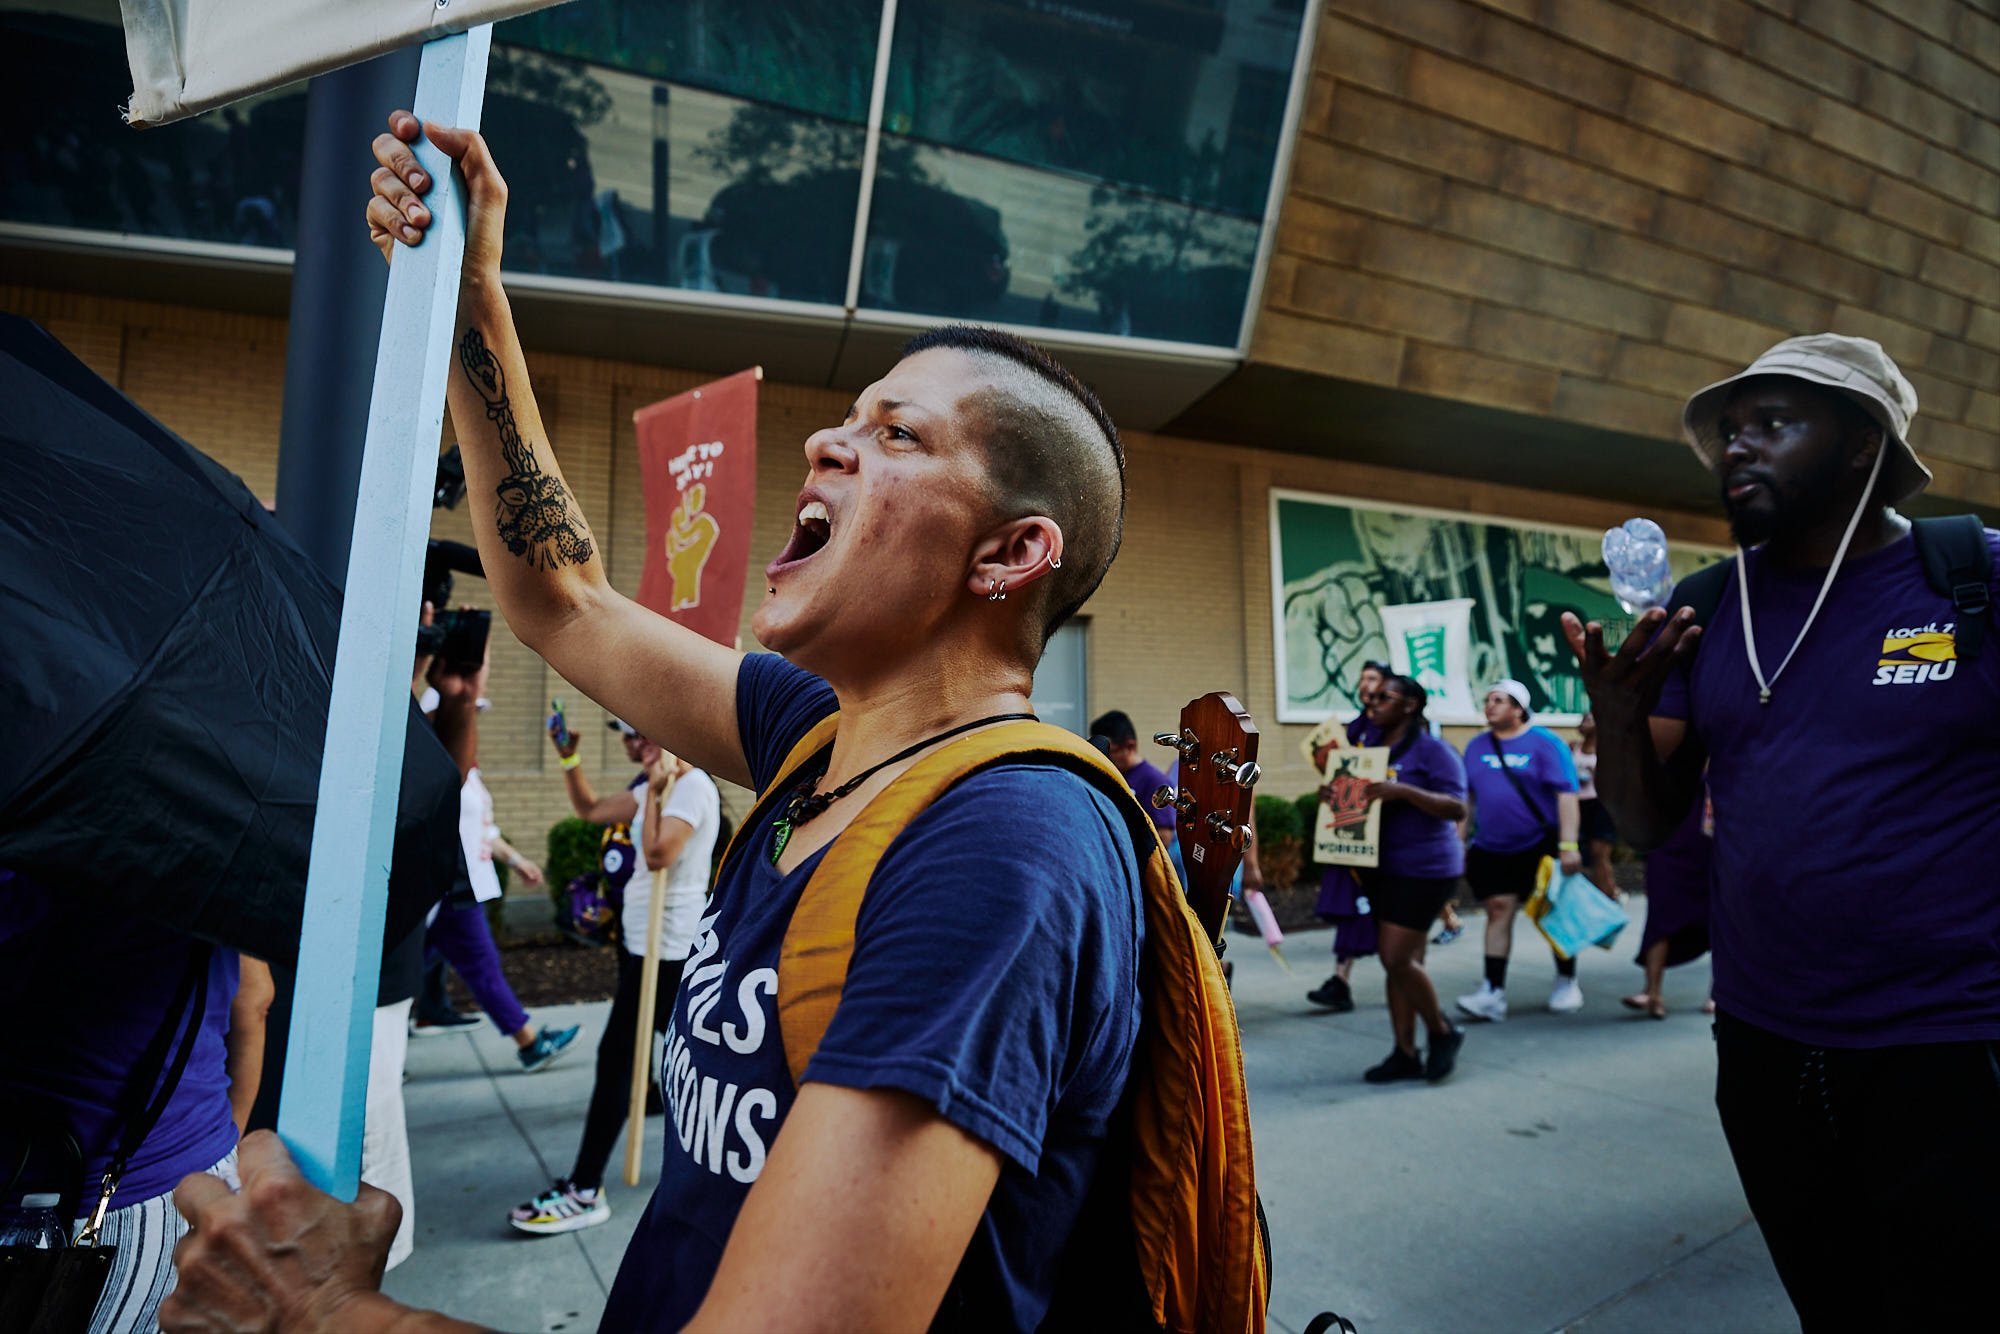  Members of Service Employees International Union Local 73 chapter protests outside the Fox News Republican Debate in Milwaukee, W.I. on Aug 23, 2023. (Mustafa Hussain for The Free Press) 